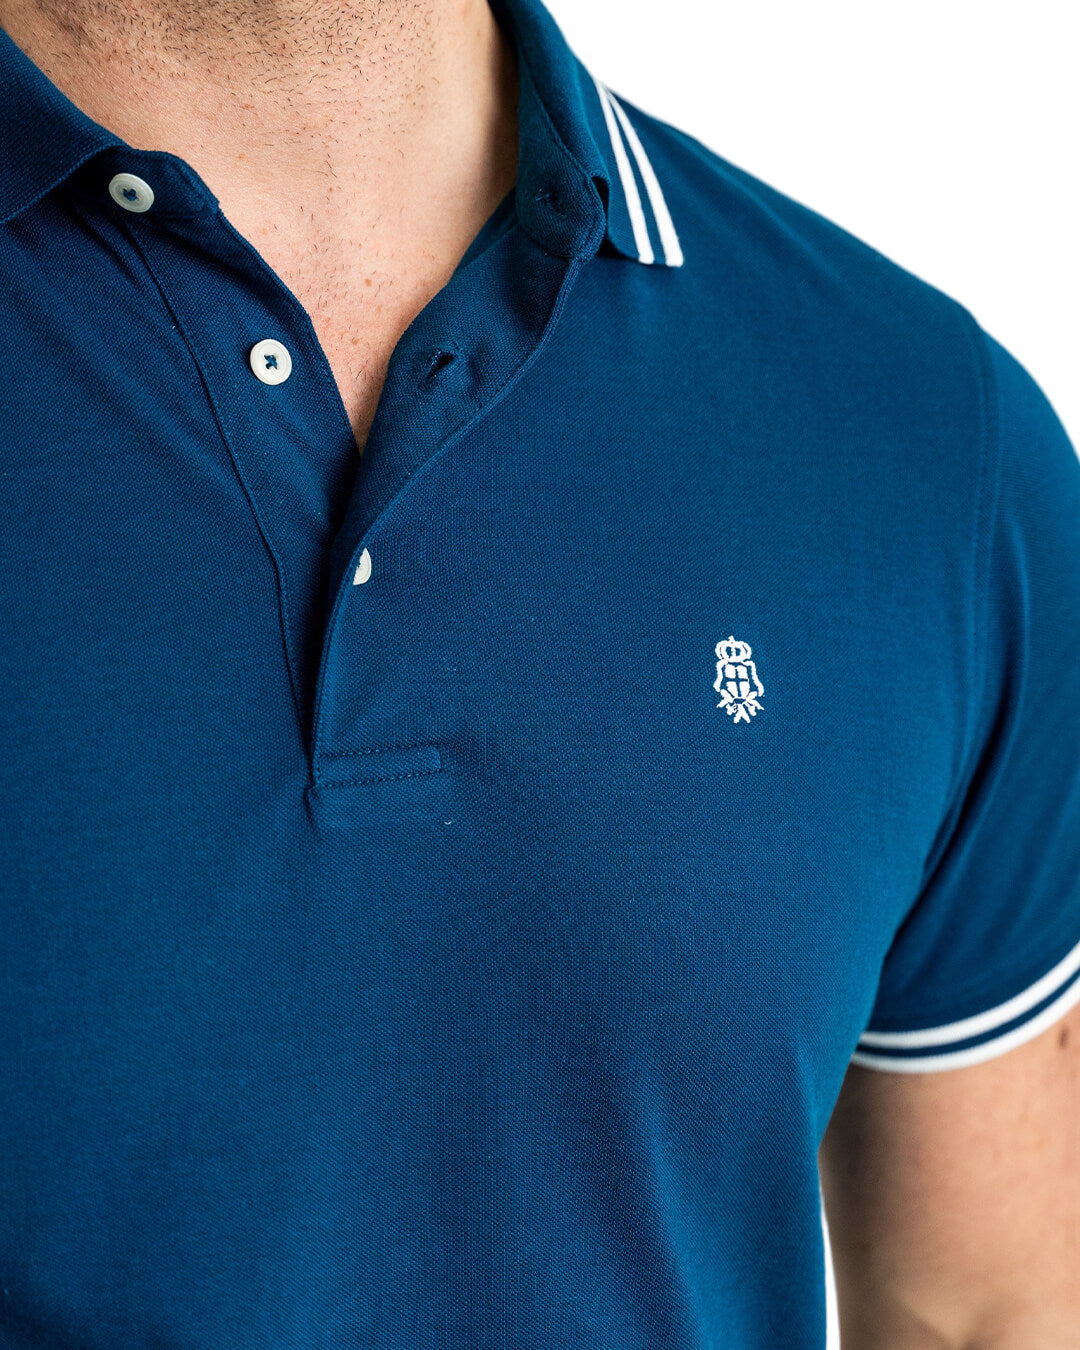 Navy Pique Polo Shirt With Double Tipped Collar & Cuff